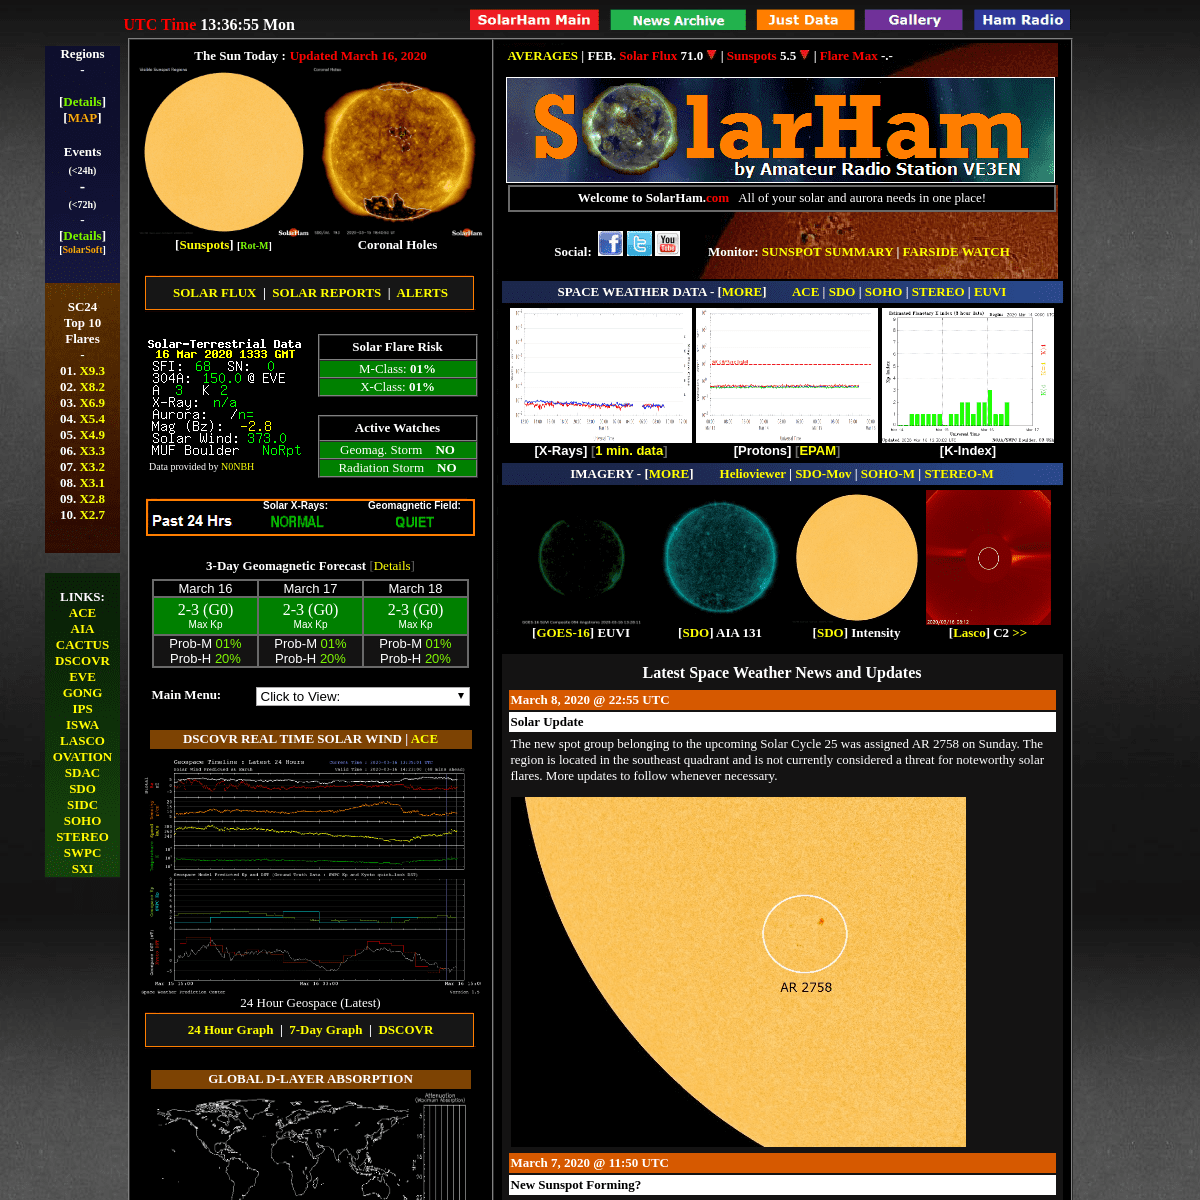 A complete backup of solarham.net